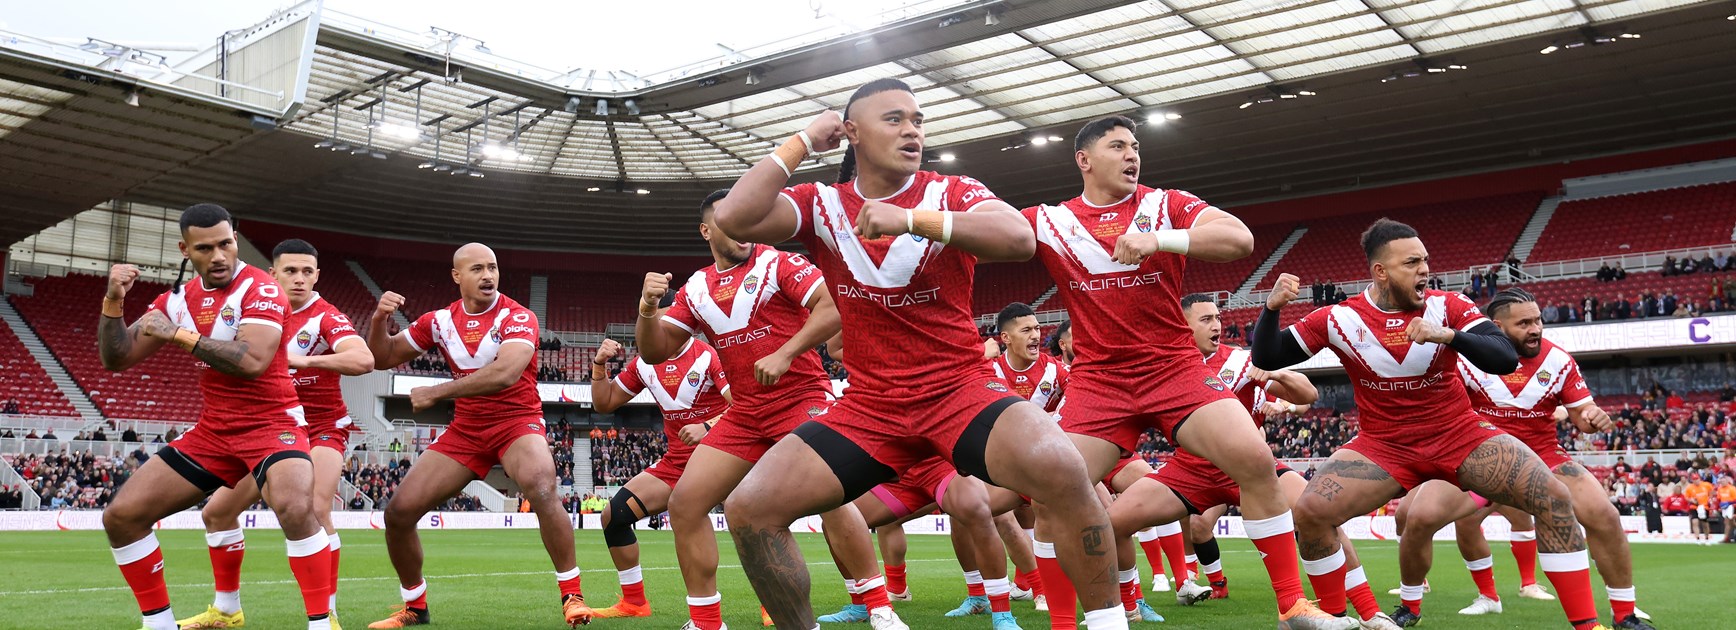 'Brighter future after me': Taumalolo backs Tonga's Gen Next to fulfil Cup vow